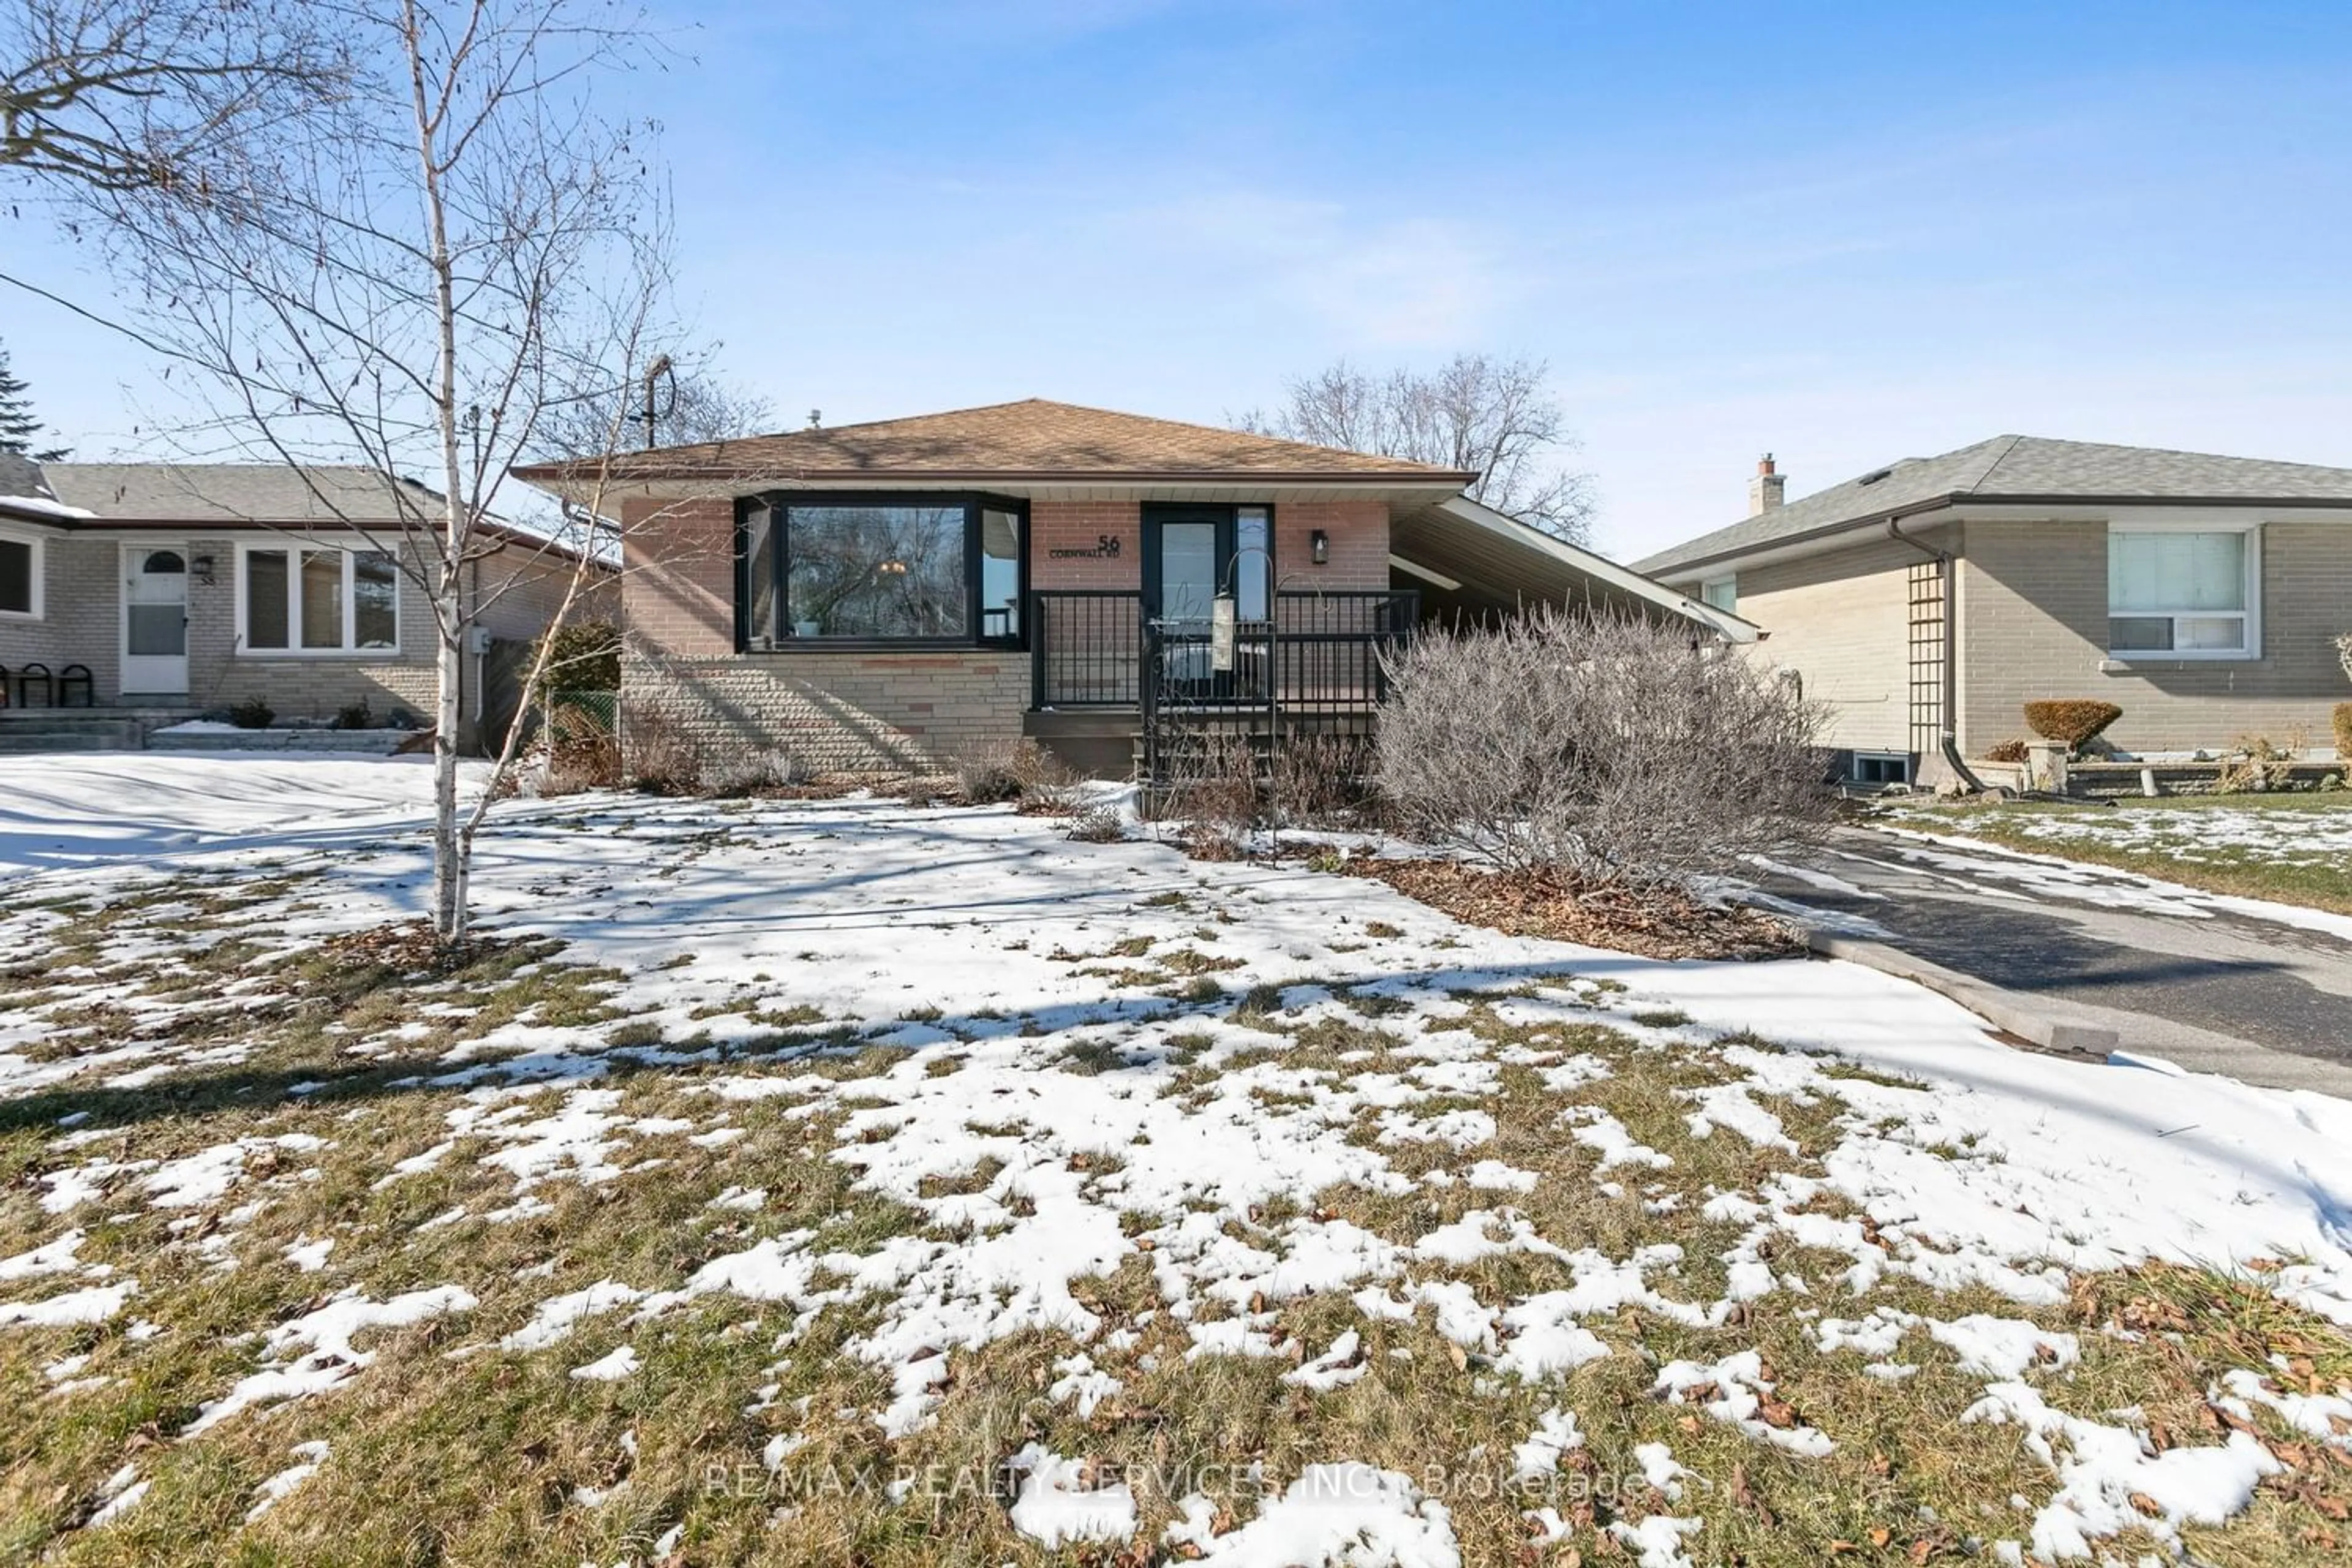 Home with unknown exterior material for 56 Cornwall Rd, Brampton Ontario L6W 1N3